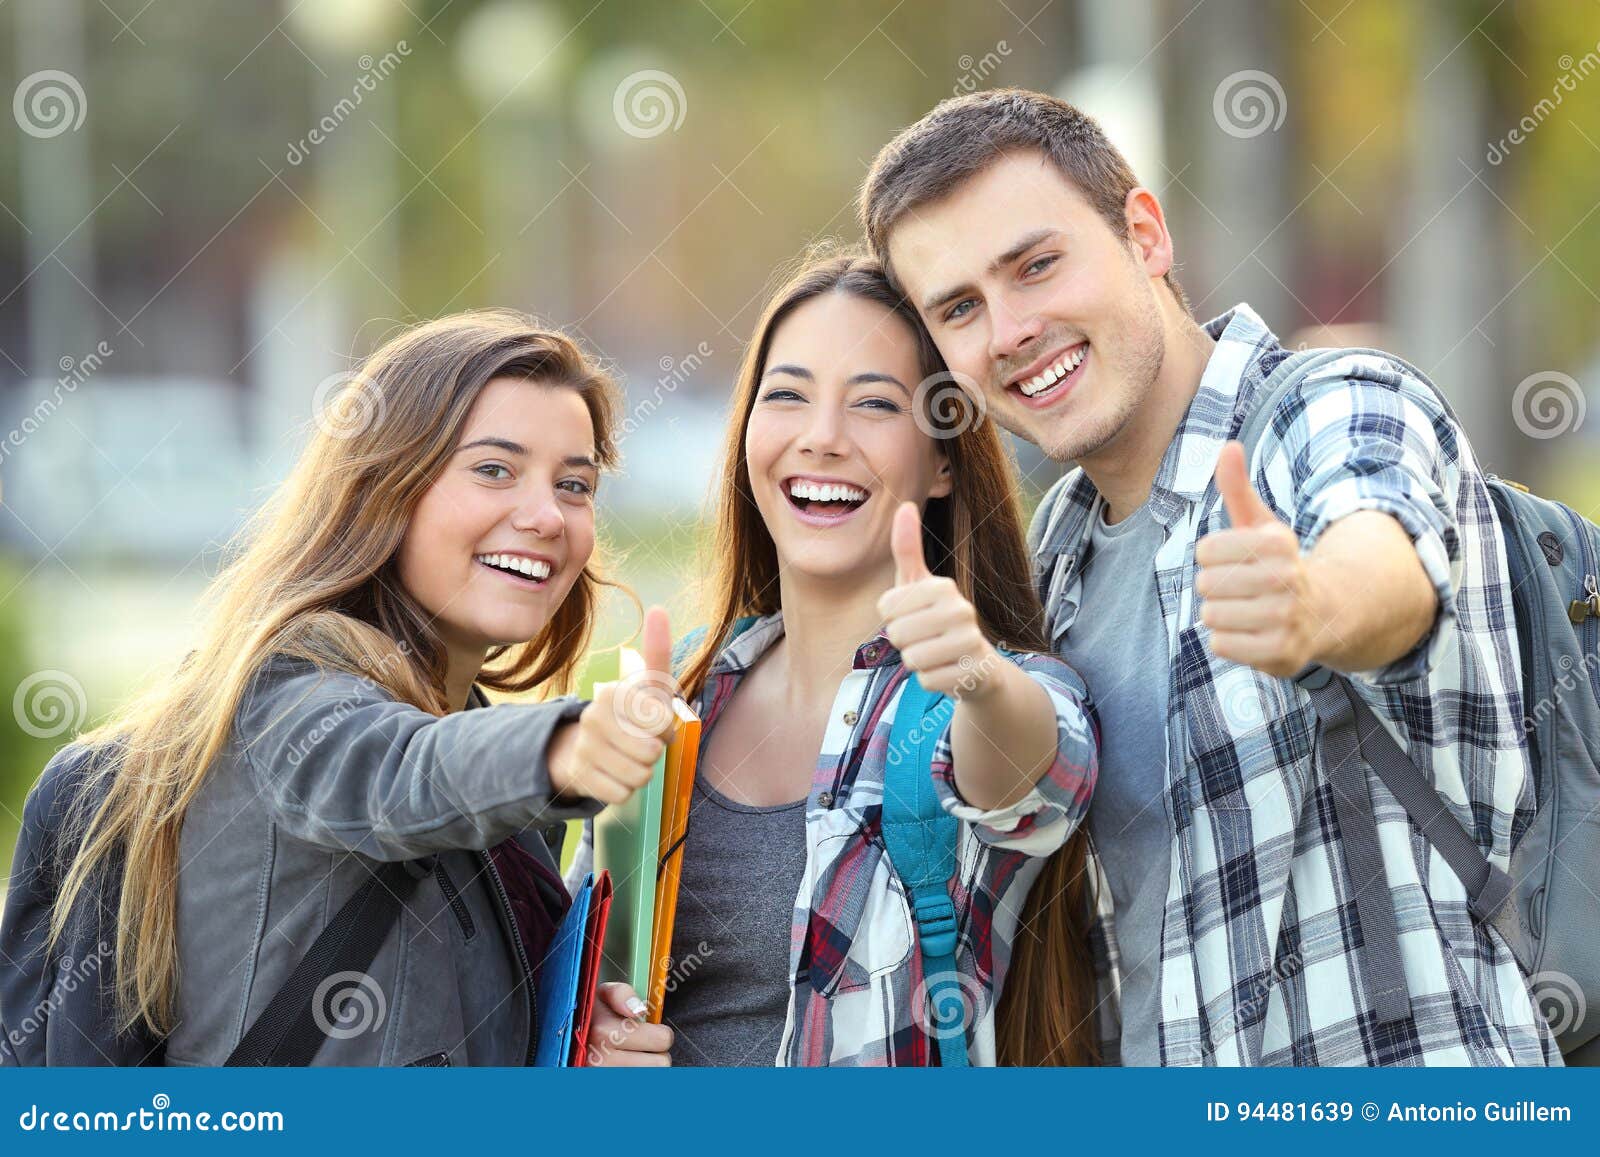 three happy students with thumbs up